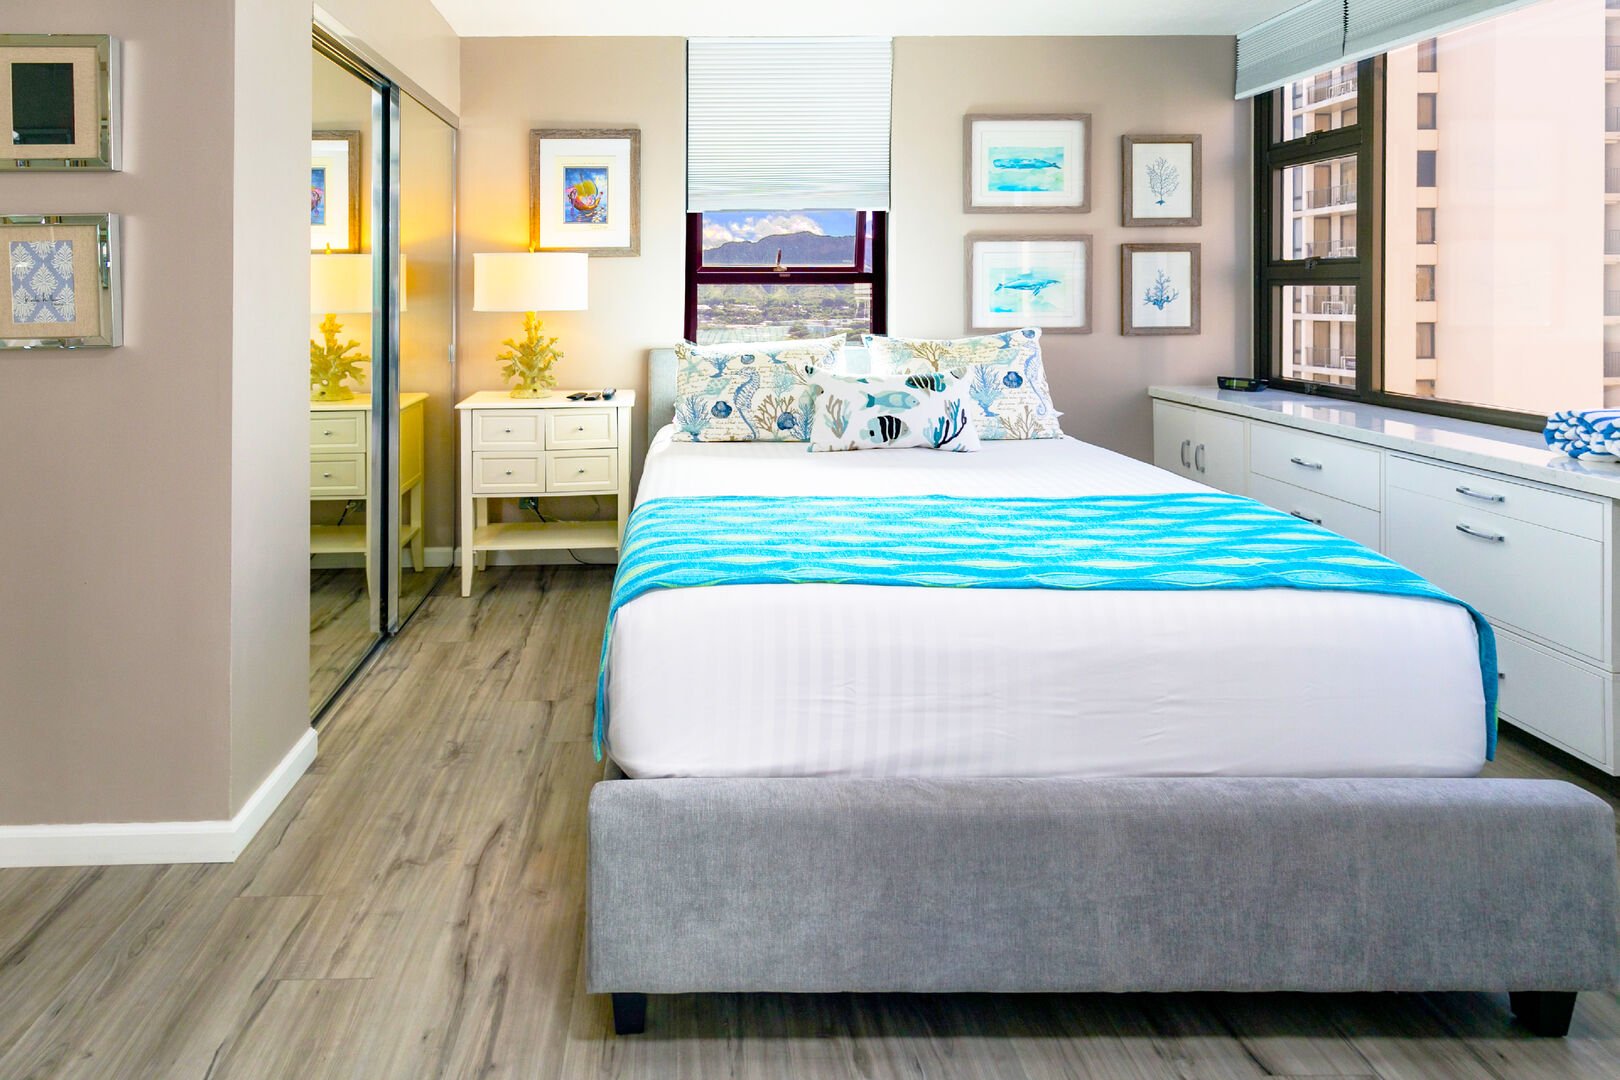 Bedroom with queen size mattress on adjustable base (raise the head and foot part of the mattress), Ocean Views and TV